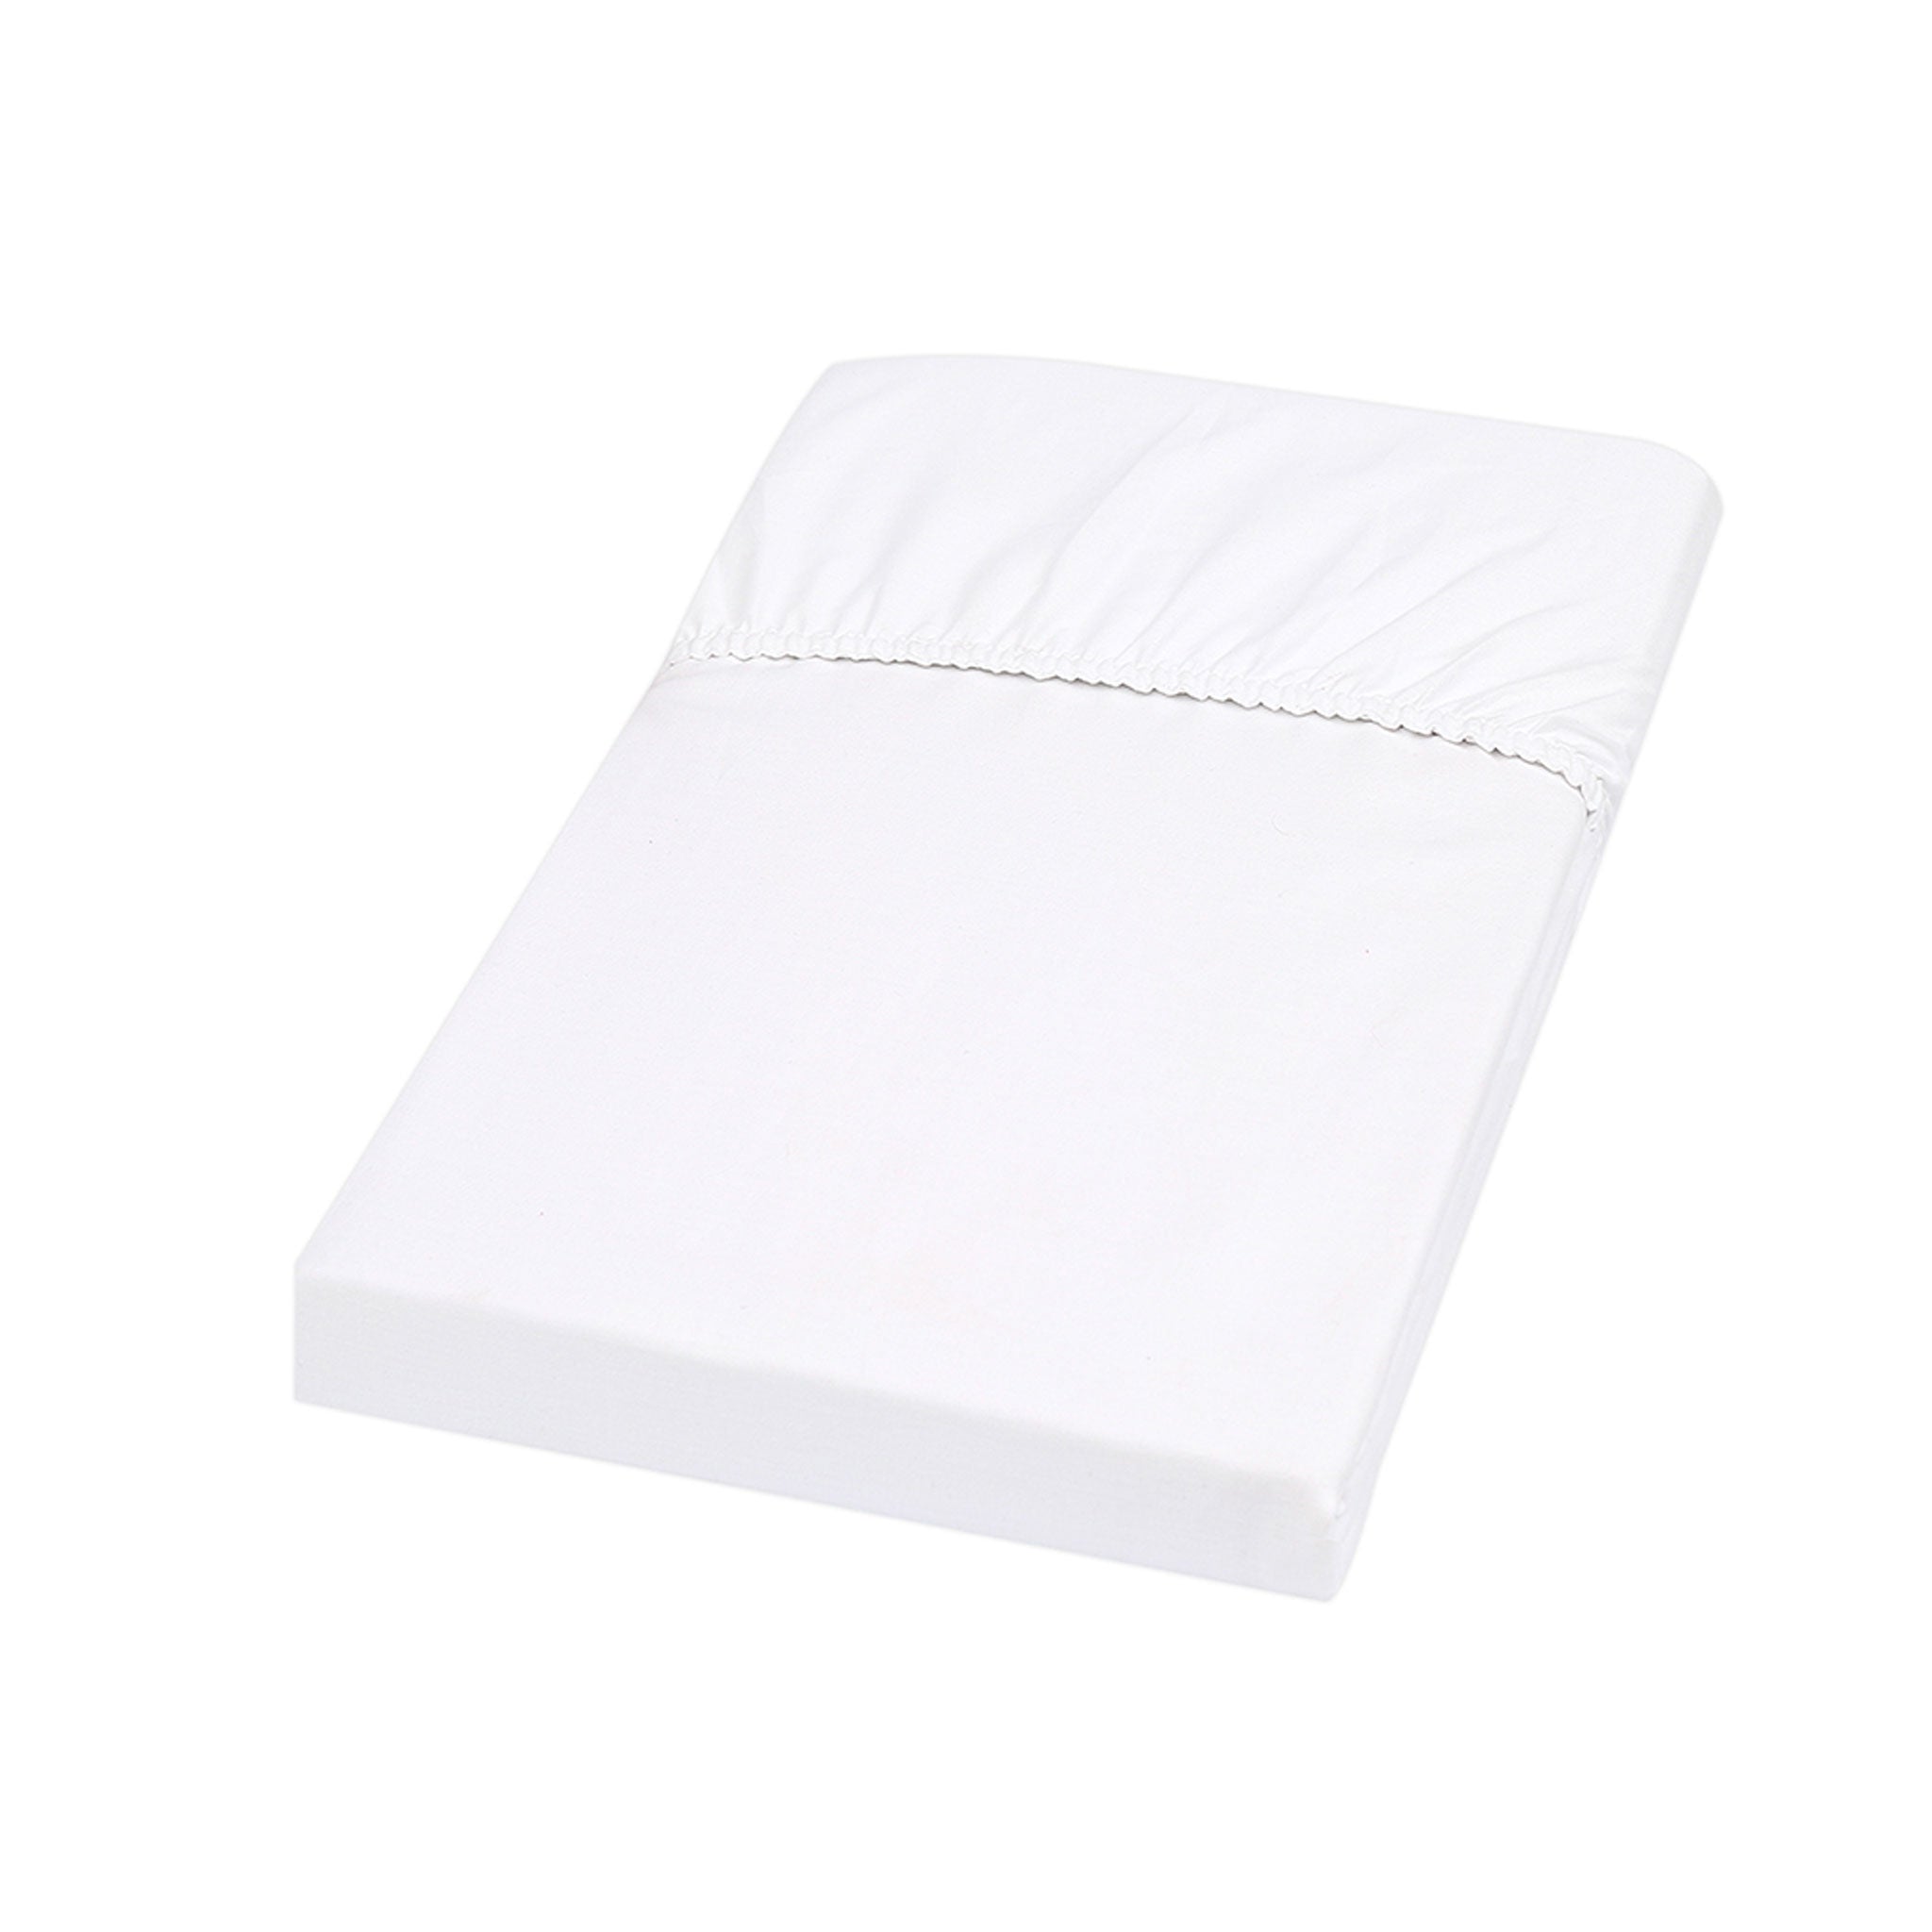 300 Thread Count  White Silky Soft Satin Fitted bed Sheets